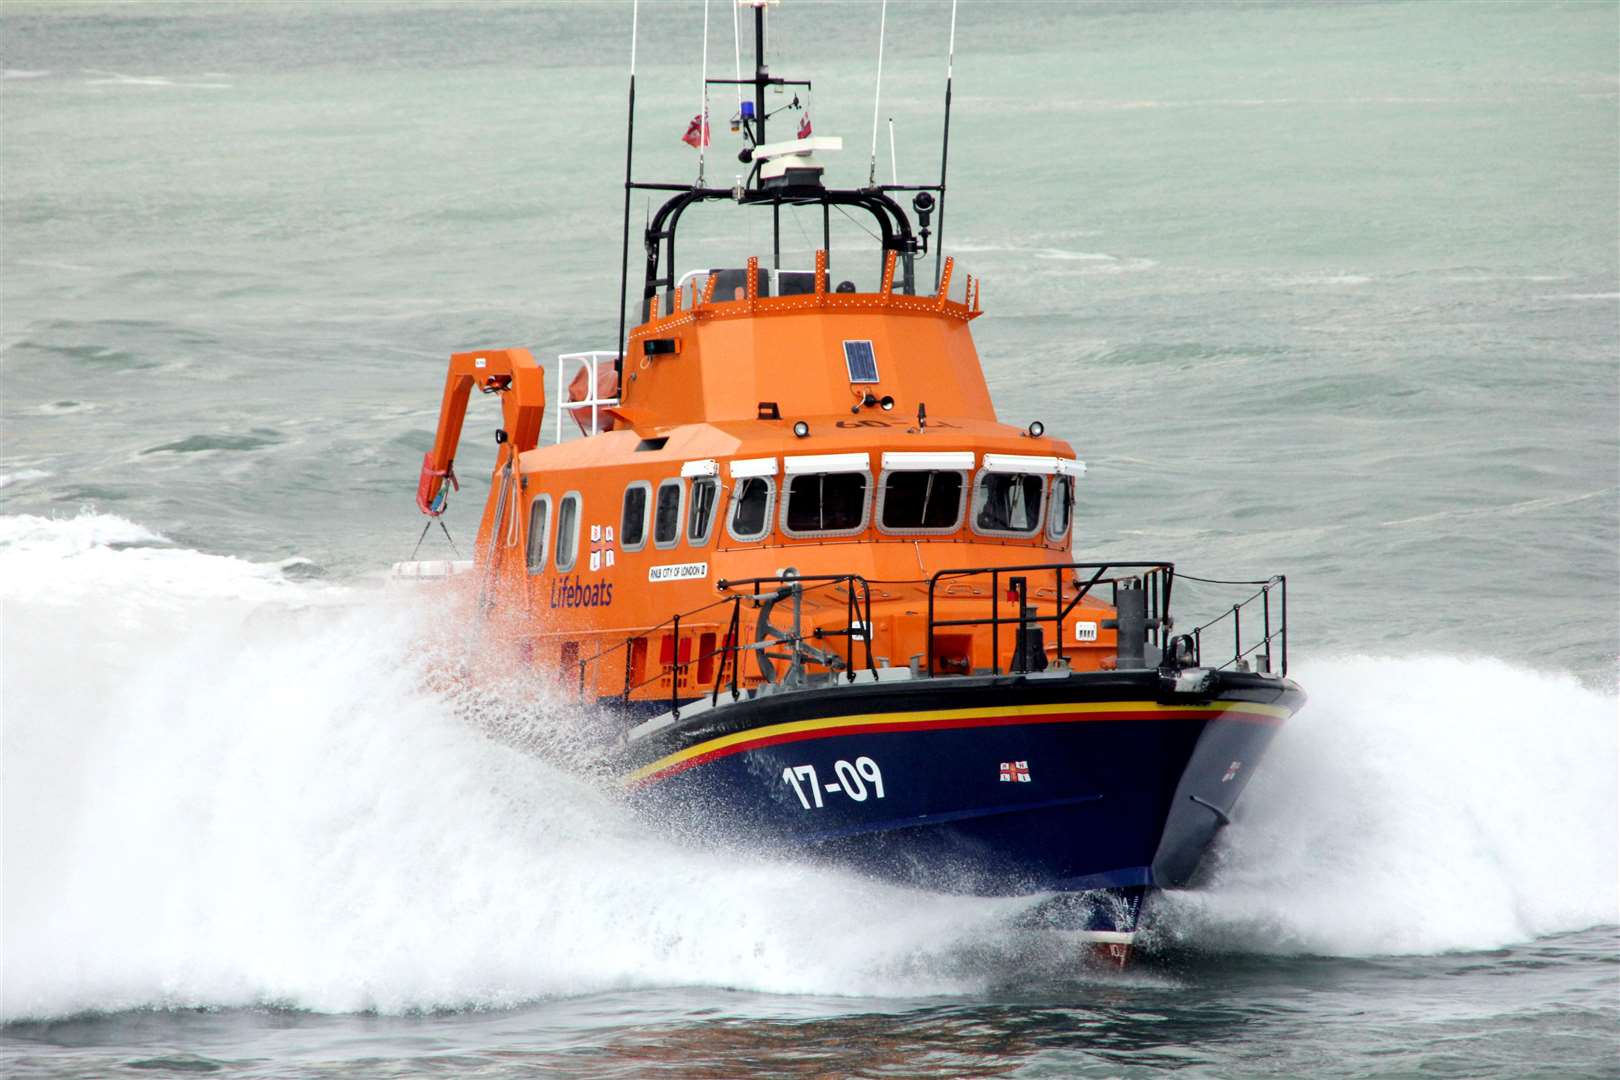 The Dover Lifeboat was dispatched